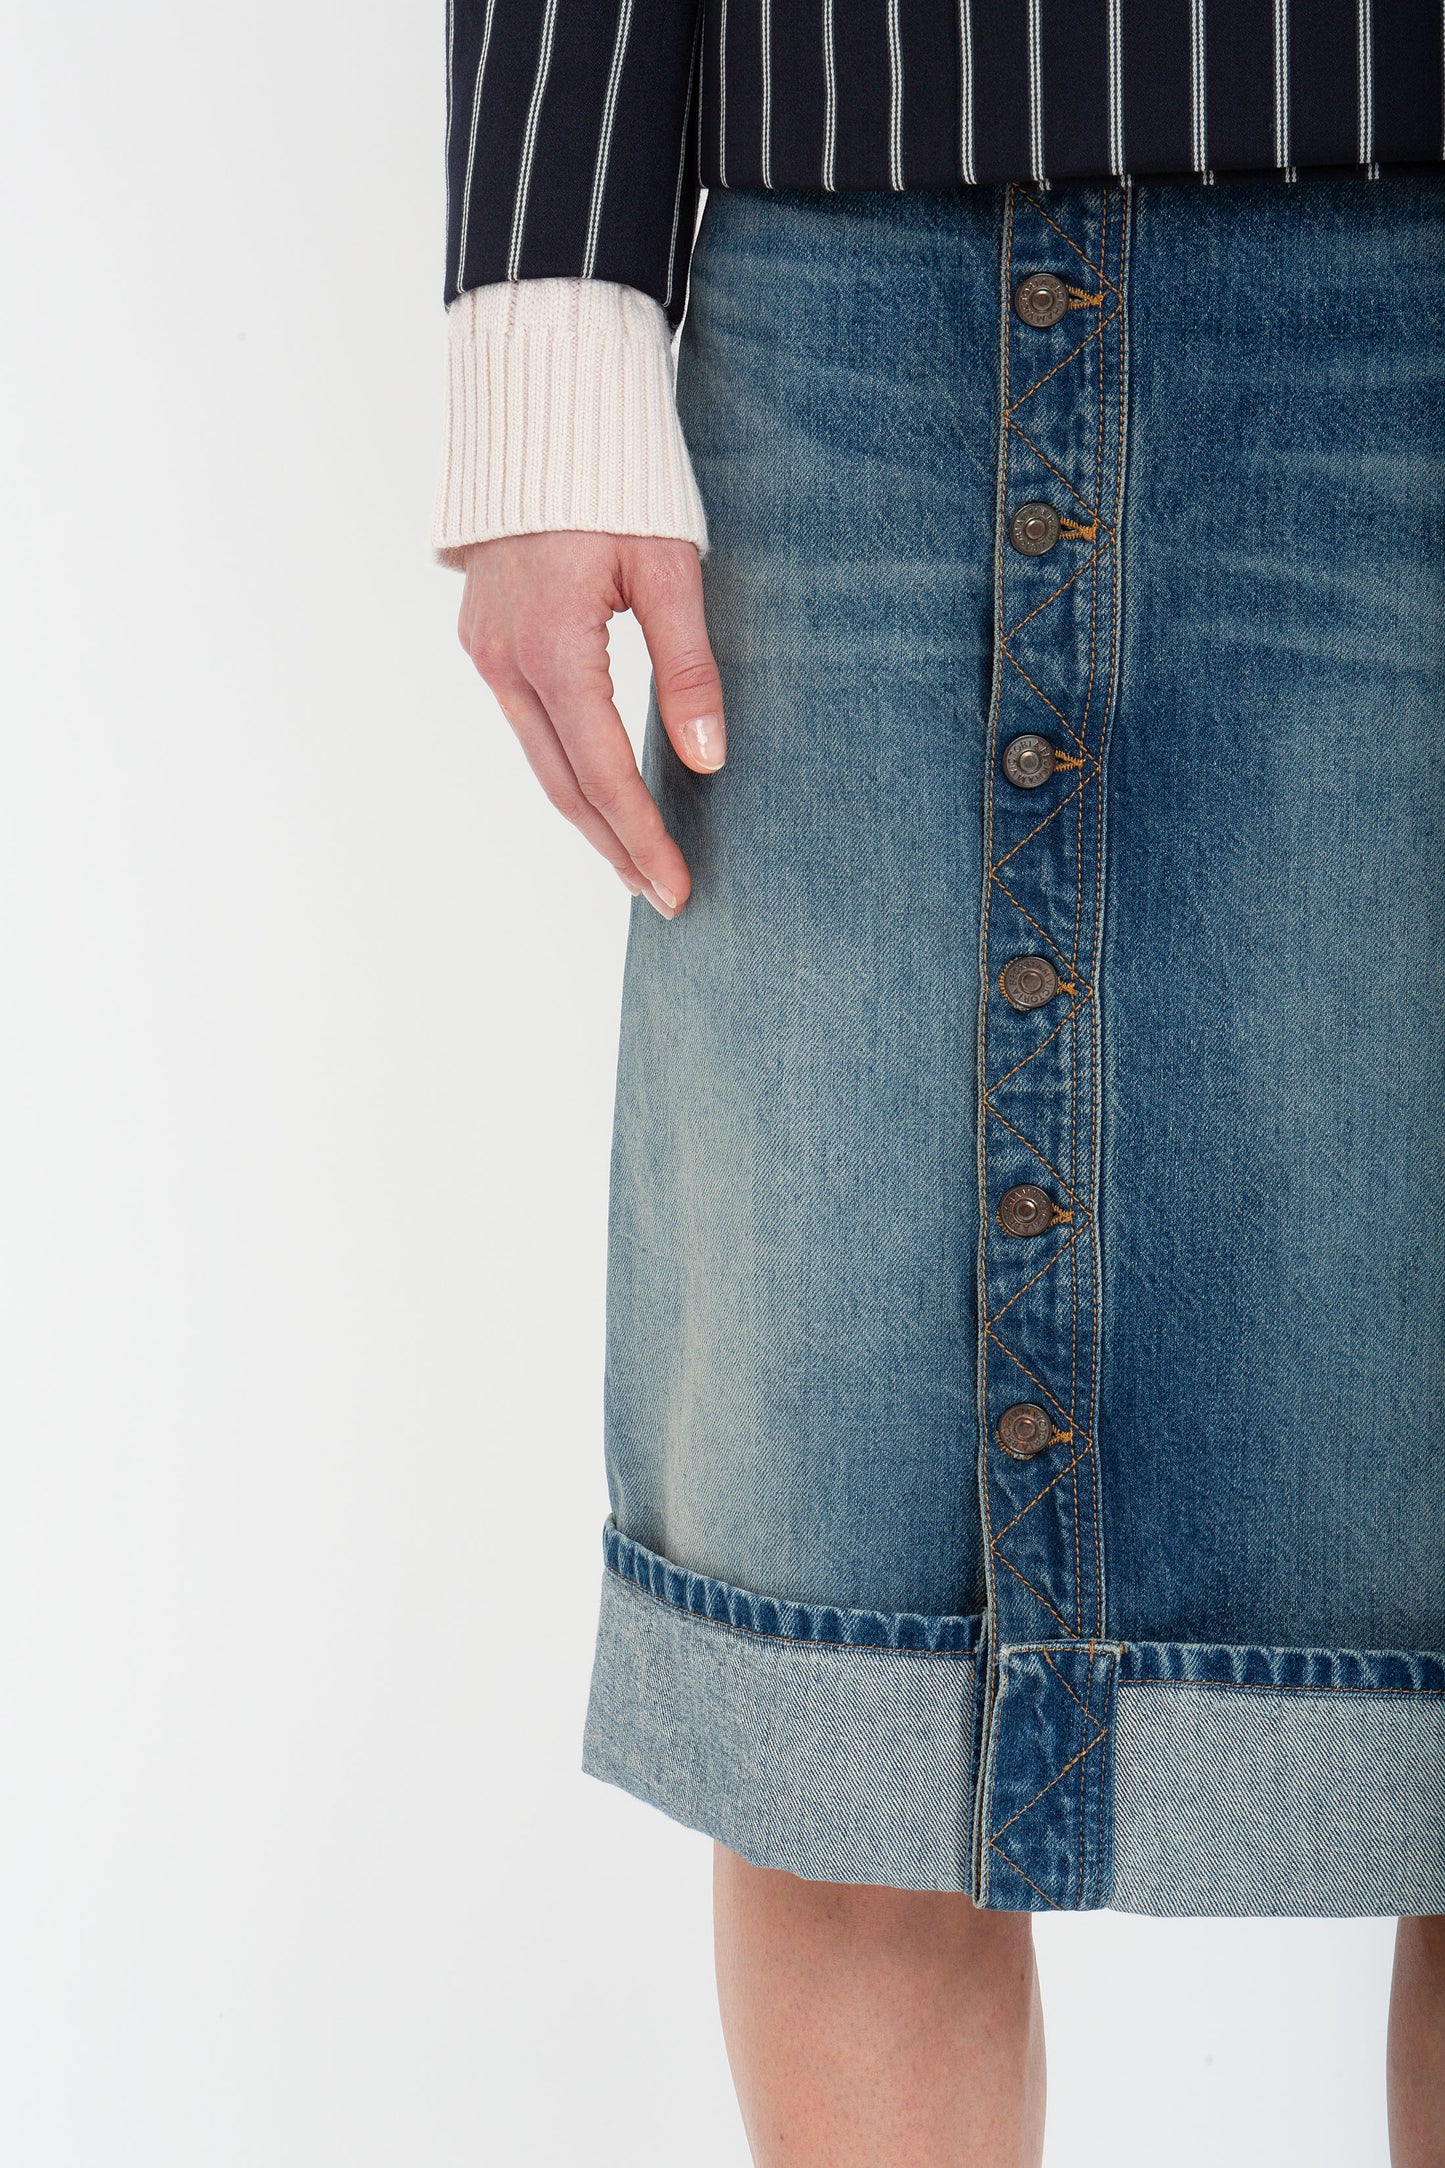 A person wearing the Victoria Beckham Placket Detail Denim Skirt In Heavy Vintage Indigo Wash paired with a long-sleeved top featuring white cuffs.